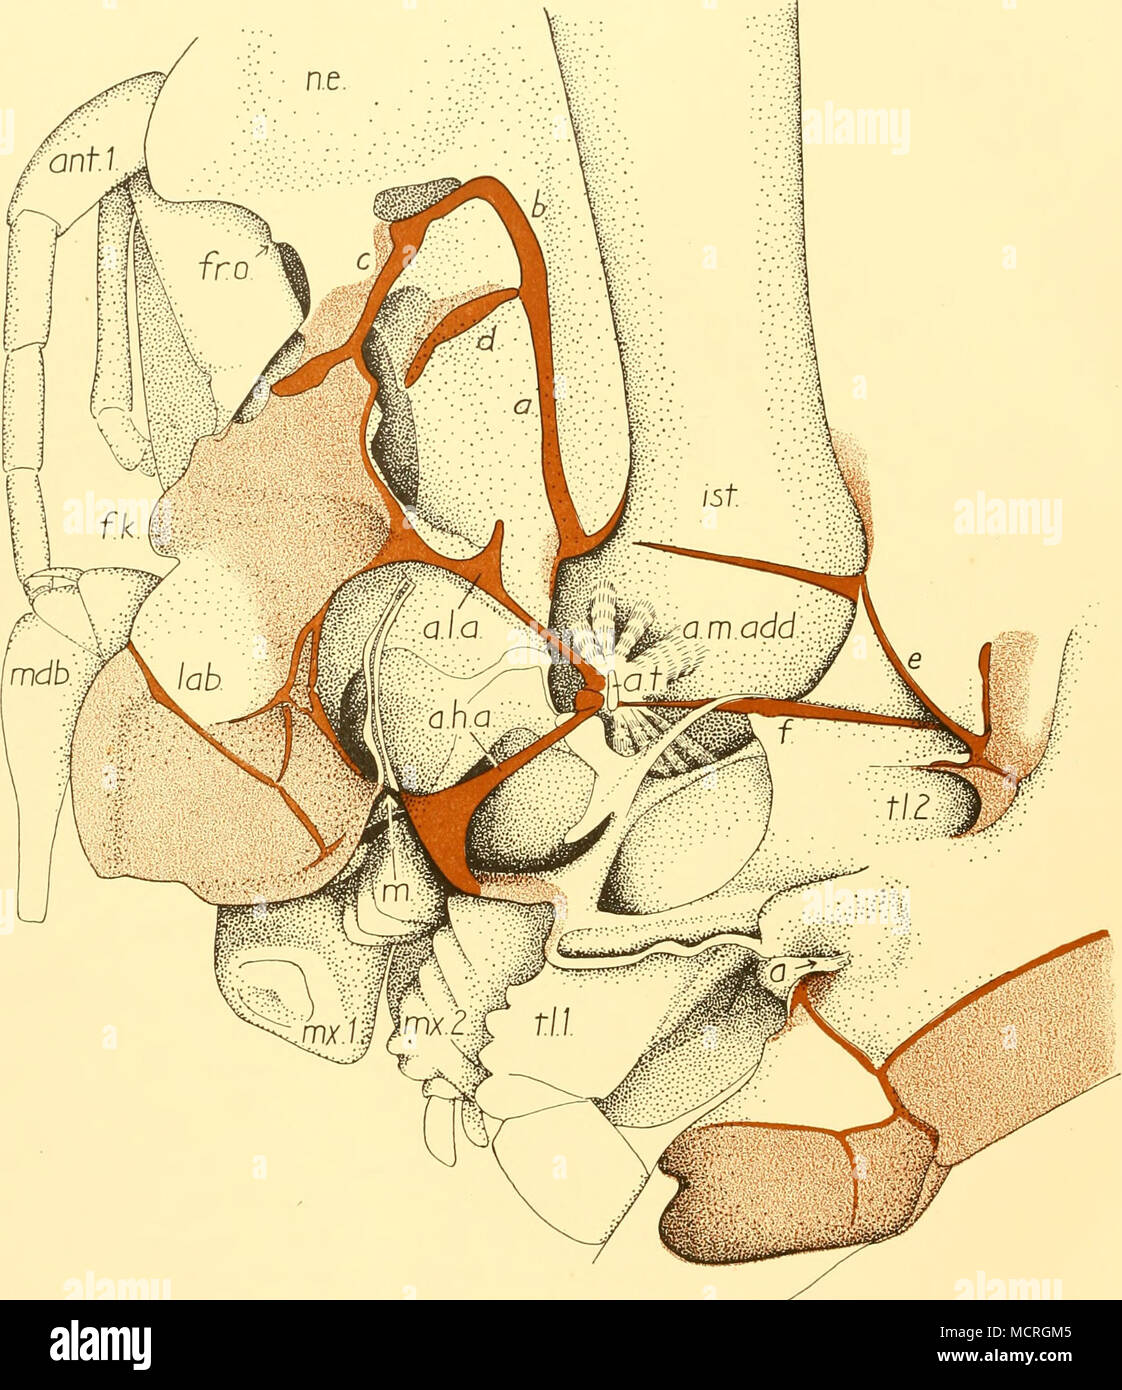 . Fig. 4. Reconstruction of right anterior skin of Gigantocypris to show attachments of limbs to body, articulated sclerite system {a-f) and endoskeletal structures and their relation to the adductor muscle. The setal armature of the mouthparts has been omitted, a. anus; a.h.a. anterior hypostomal apodeme; a.l.a. antenno-labral apodeme; a.m.add. attachment of adductor muscle; ant.i, antennule; a.i. tendon of adductor muscle;/.&amp;. frontal knob;/r.o. frontal organ; ist. isthmus; lab. labrum; m. mouth; mdb. mandible; mx.i, maxillule; mx.2, maxilla; n.e. nauplius eye; t.l.i, first trunk limb; t Stock Photo